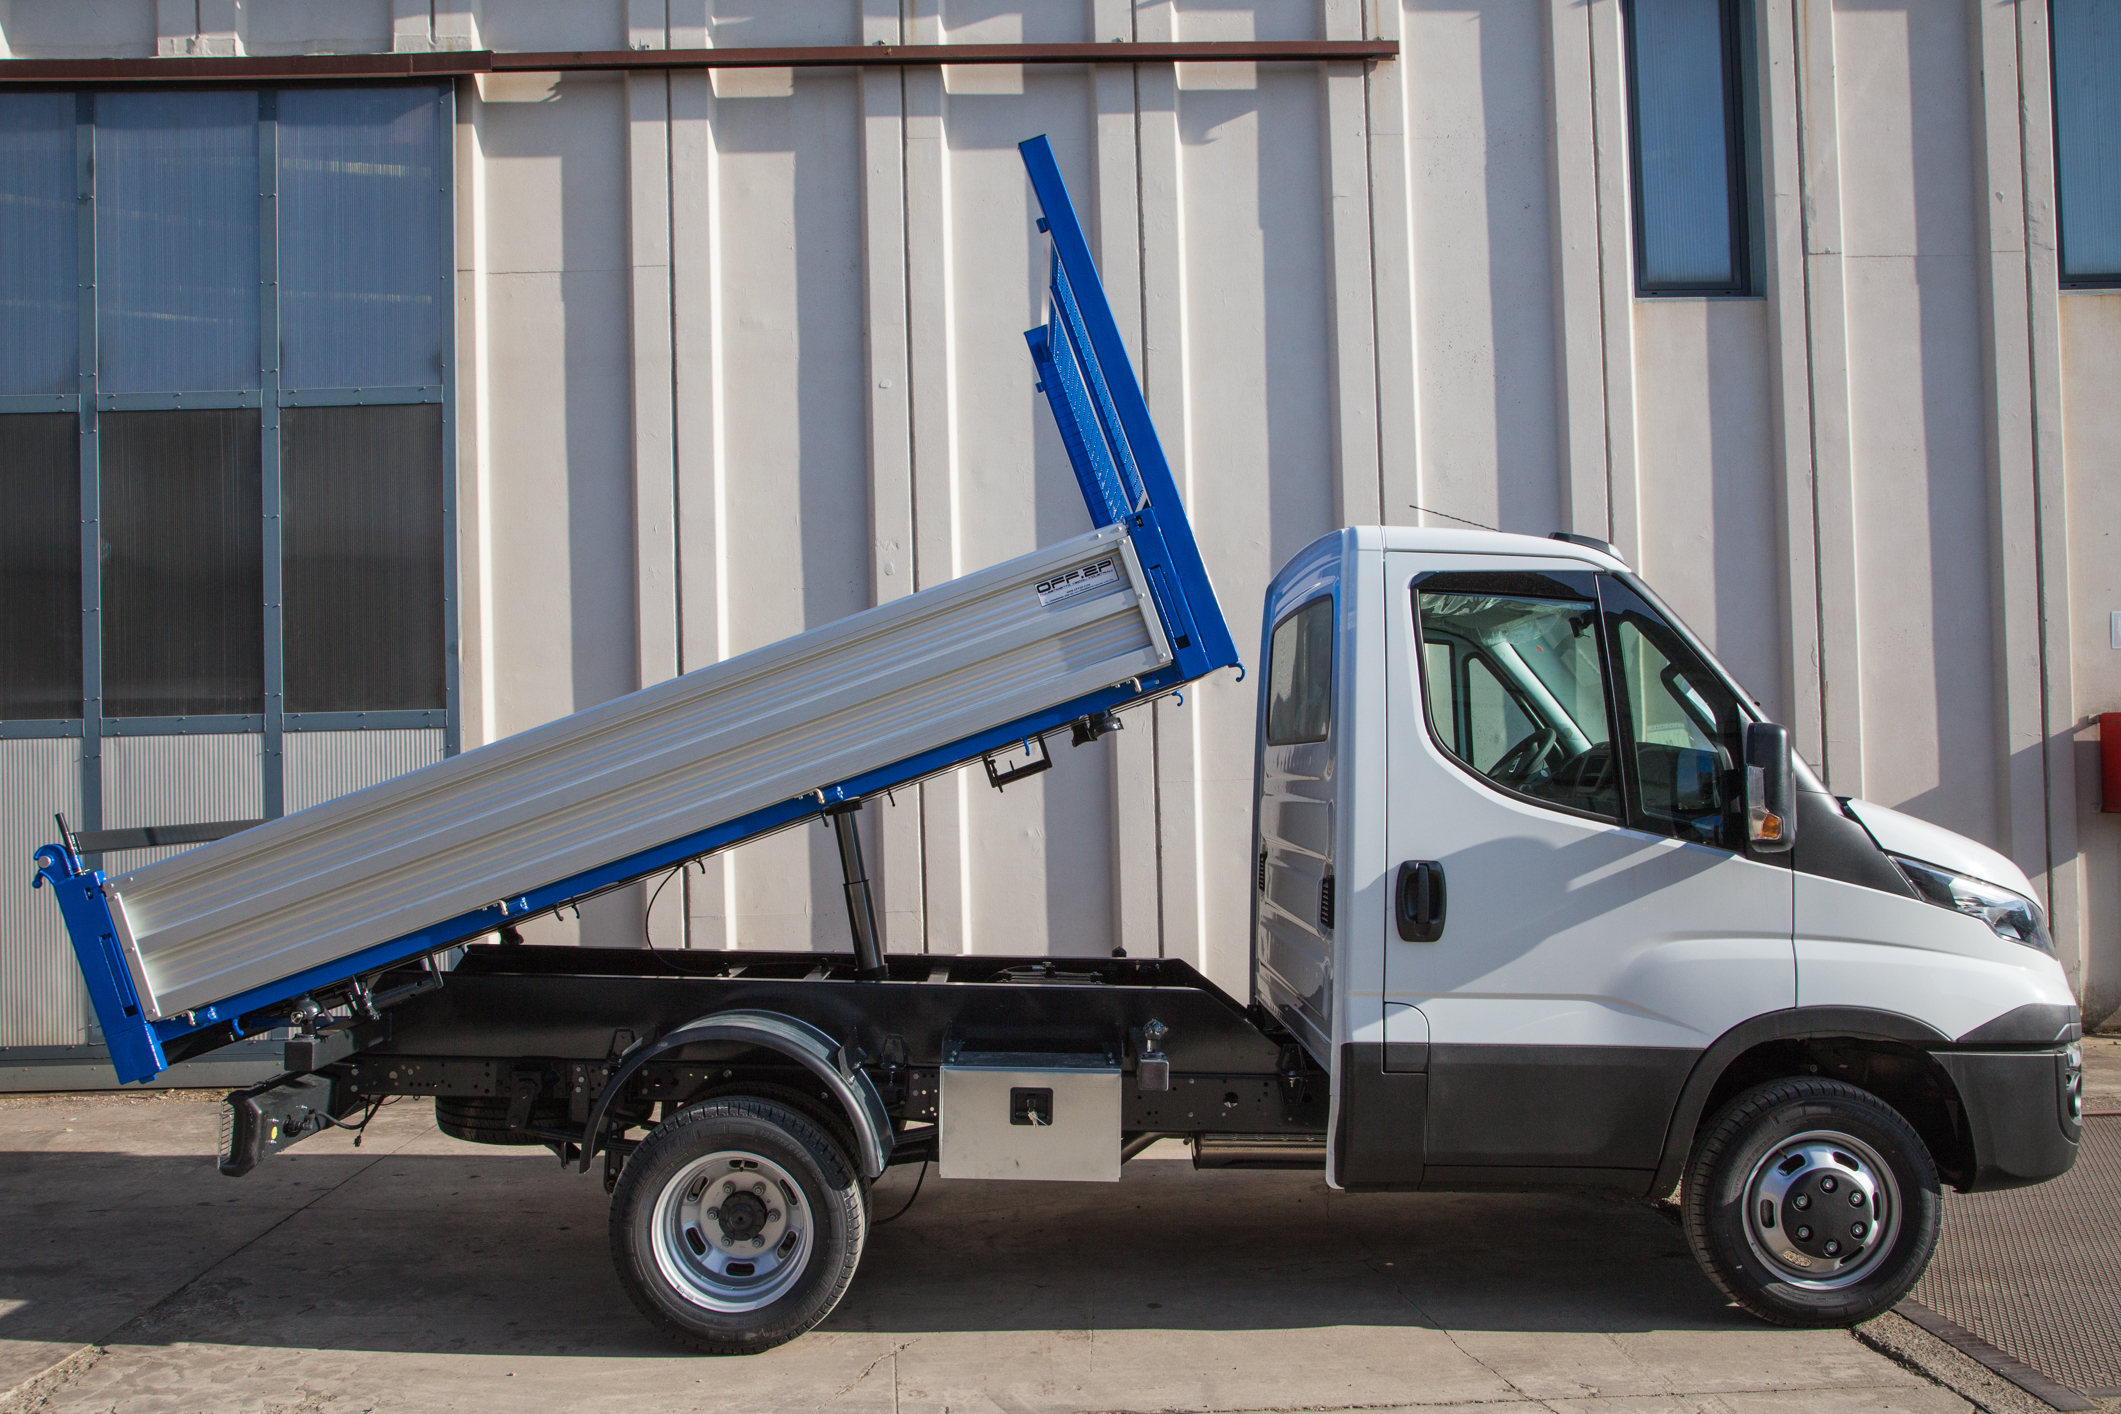 Ribaltabile trilaterale New Iveco Daily 35C 2014 